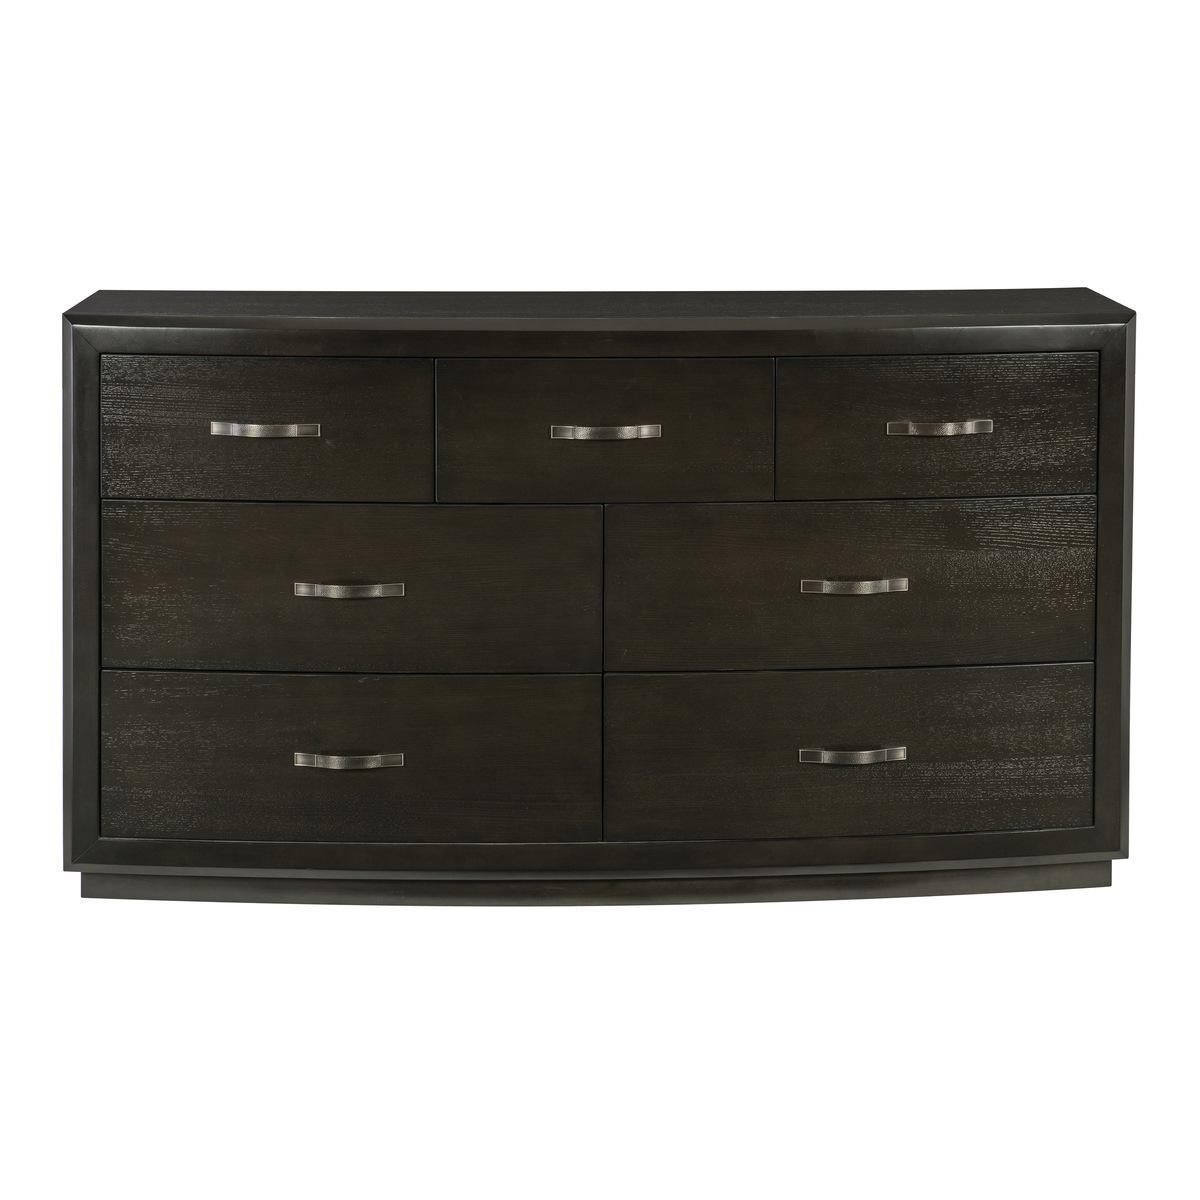 Transitional Dresser 1575-5 Hodgin 1575-5 in Charcoal 